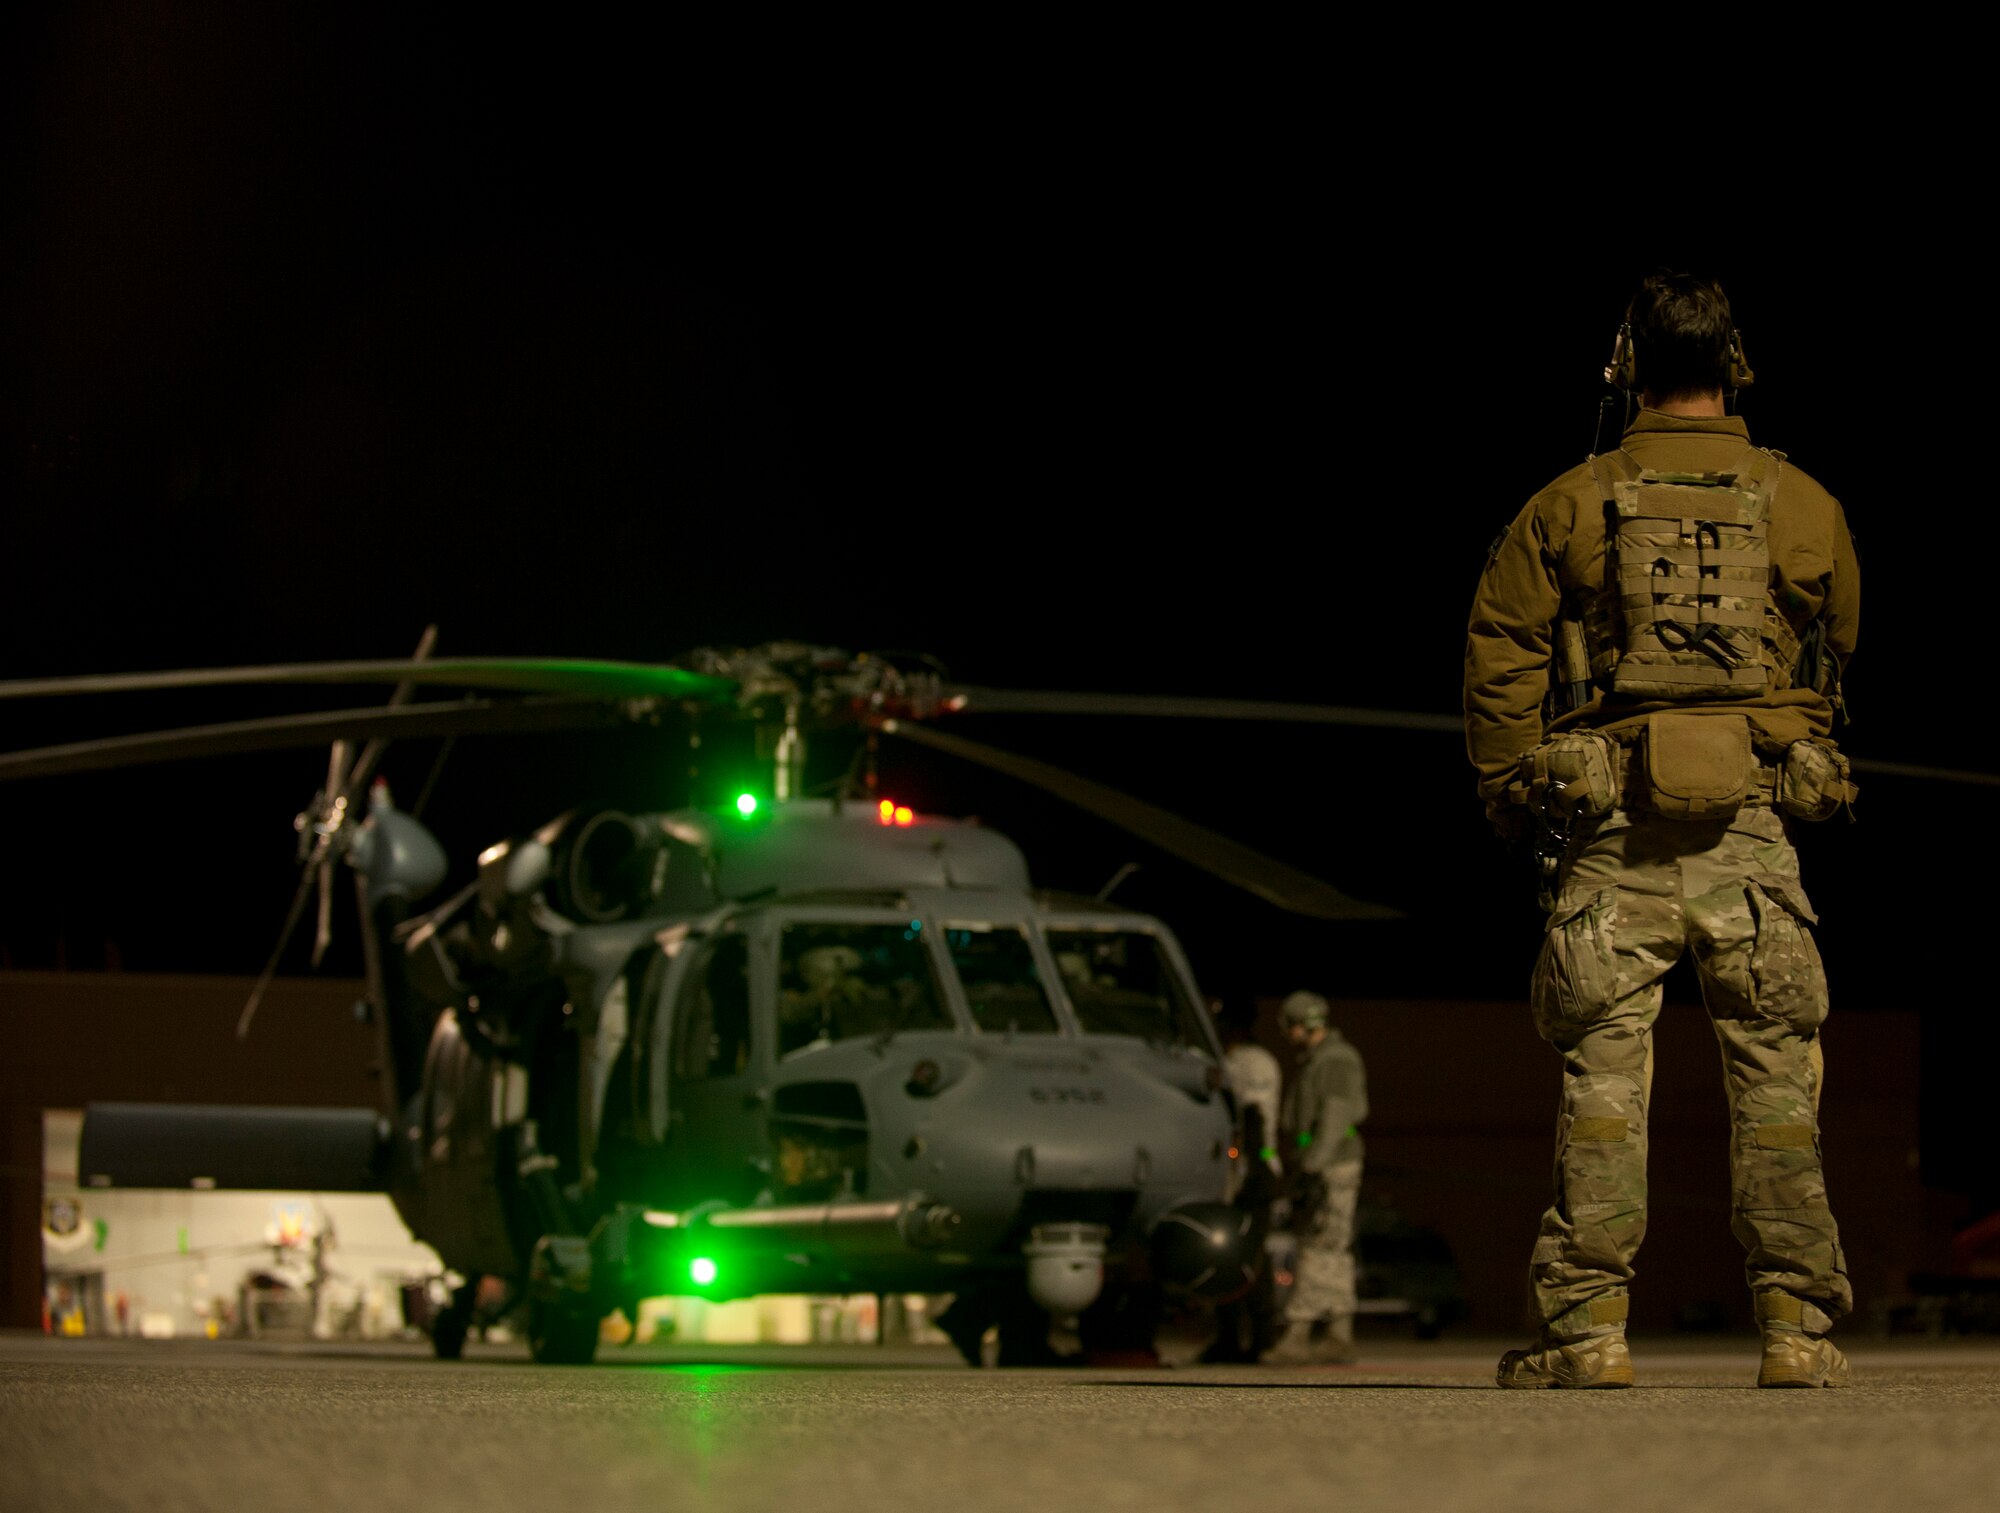 A Pararescueman assigned to the 48th Rescue Squadron, Davis-Monthan Air Force Base, Ariz., looks on as an HH-60G Pave Hawk assigned to the 66th Rescue Squadrongoes through final preparations prior to executing a Red Flag 15-1 personnel recovery training mission at Nellis Air Force Base, Nev., Feb. 5, 2015. Pararescuemen provide emergency medical treatment necessary to stabilize and evacuate injured personnel while acting in an enemy-evading recovery role. (U.S. Air Force photo by Airman 1st Class Joshua Kleinholz)